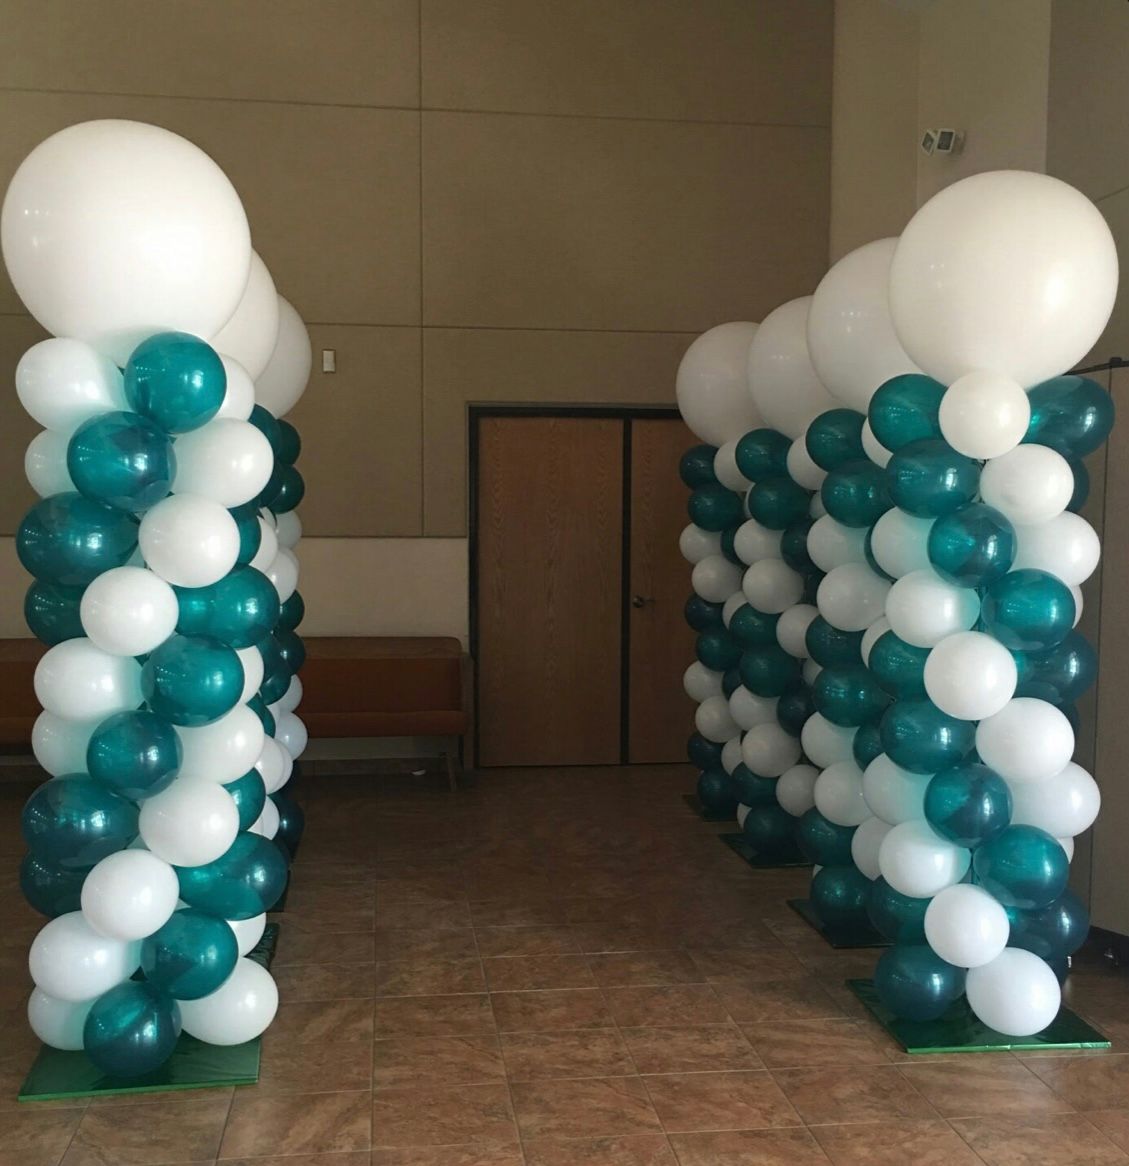 Two columns of green and white balloons in a room